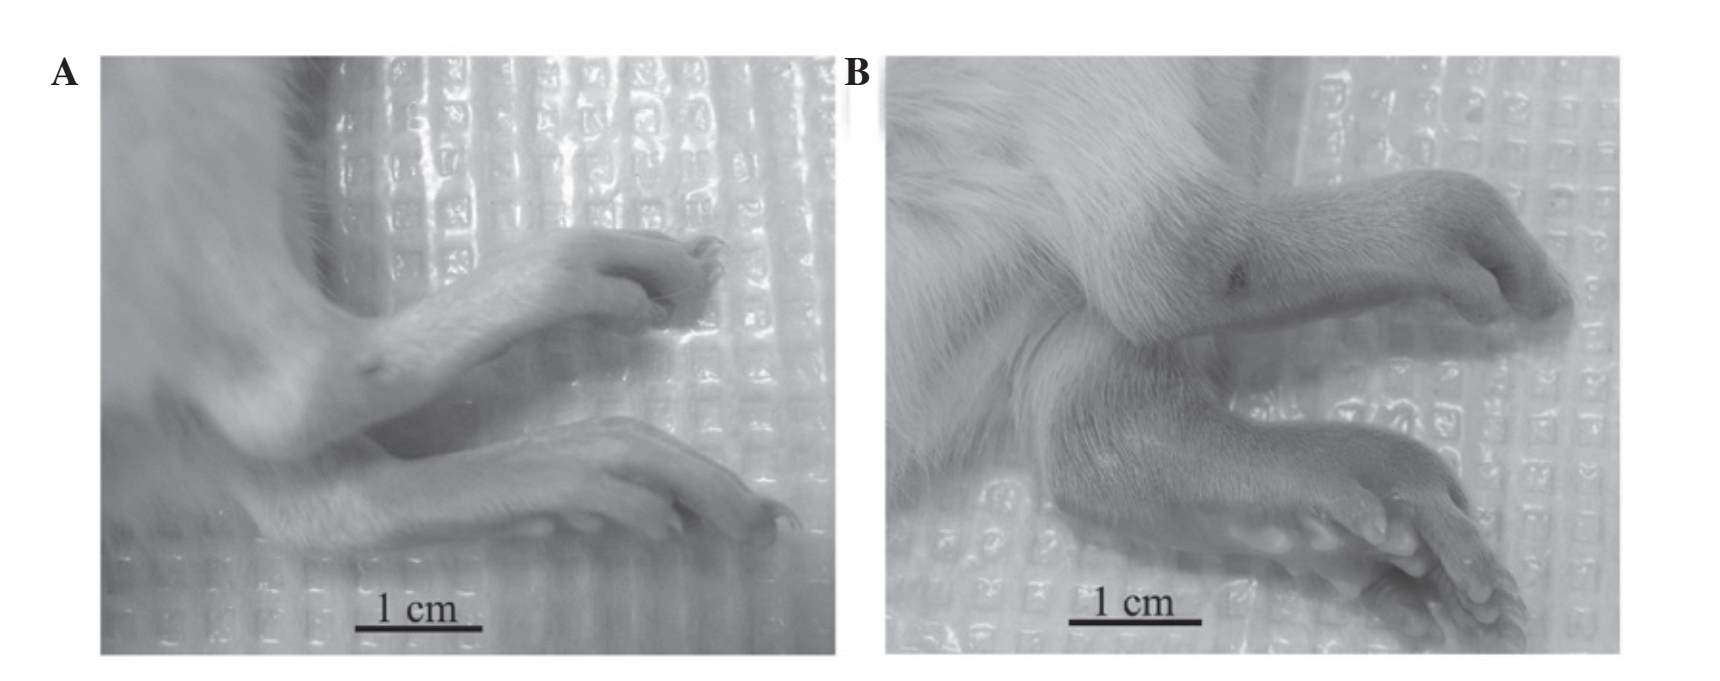 Clinical signs of CIA in the hind paws of female Wistar rats.